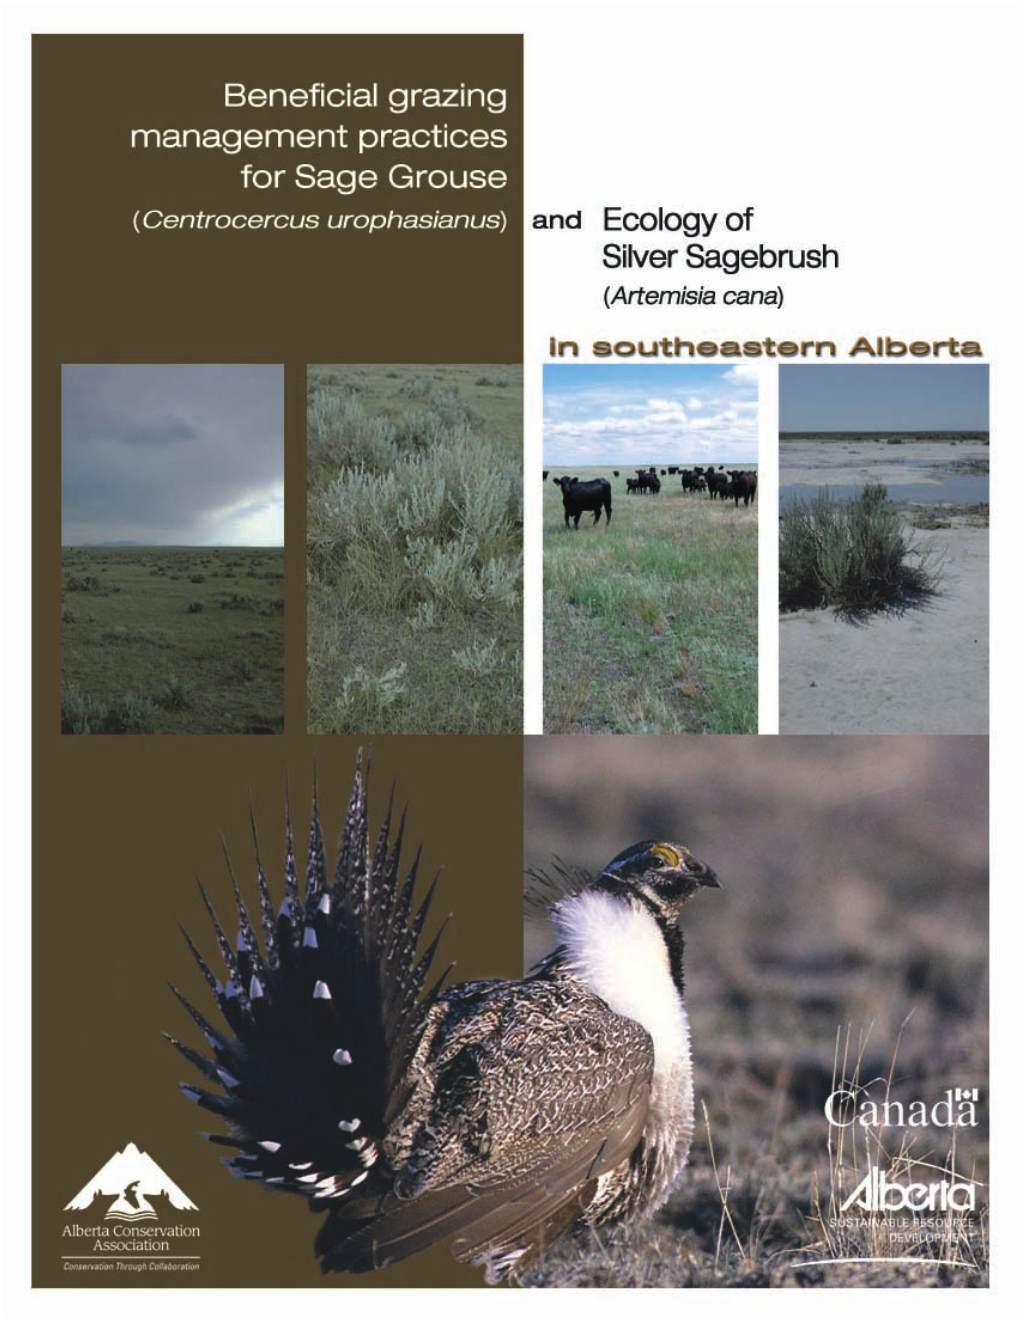 Beneficial Grazing Management Practices for Sage Grouse And